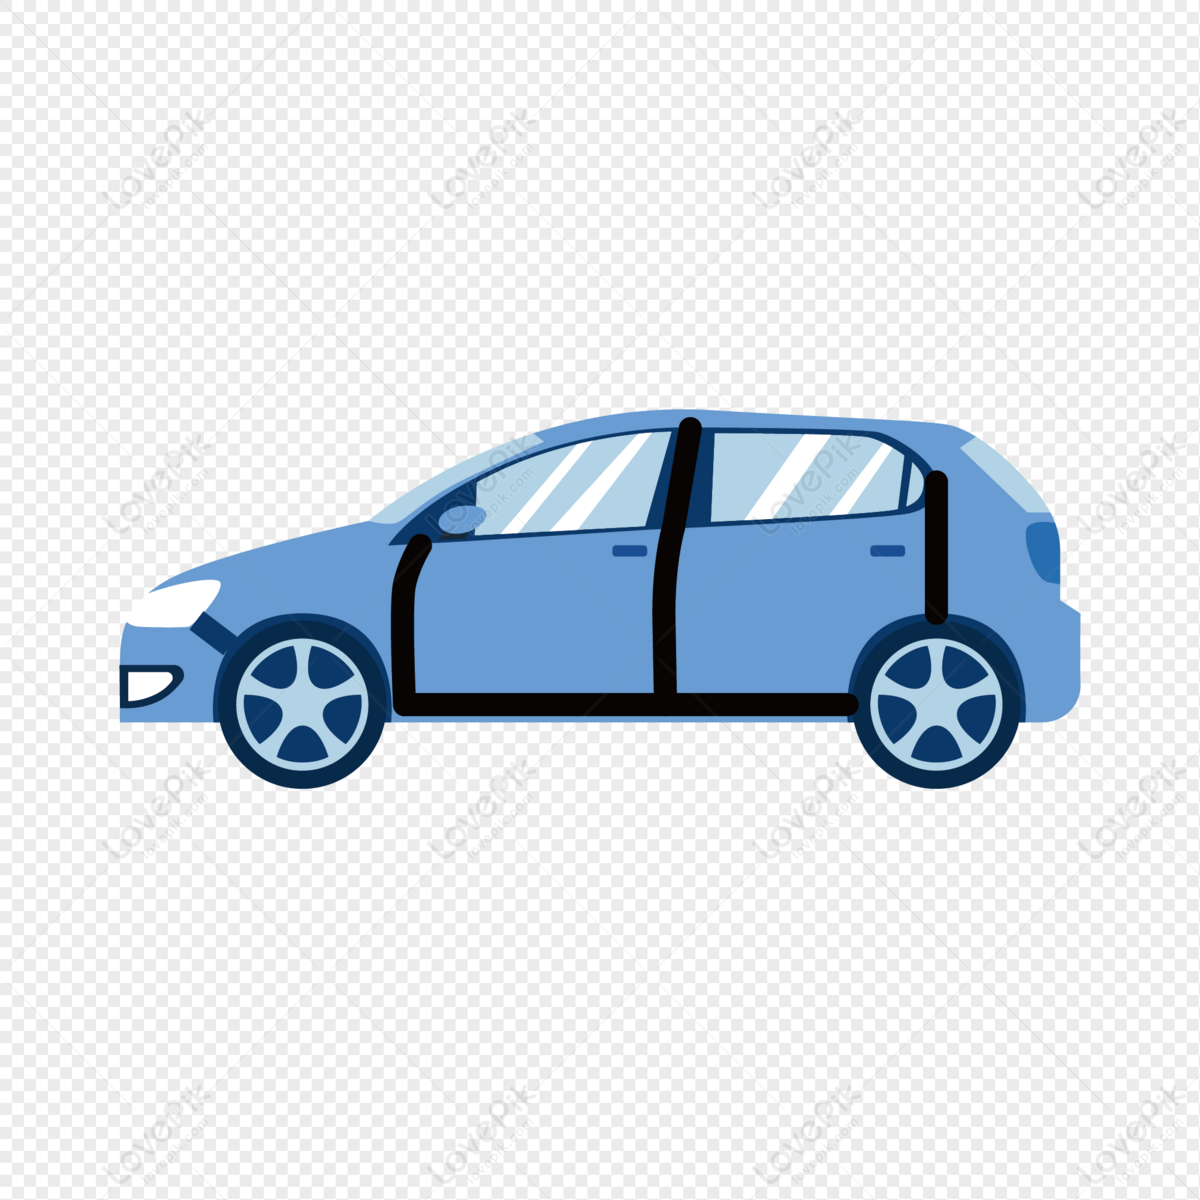 car, car picture, small car, hand drawn car png image free download